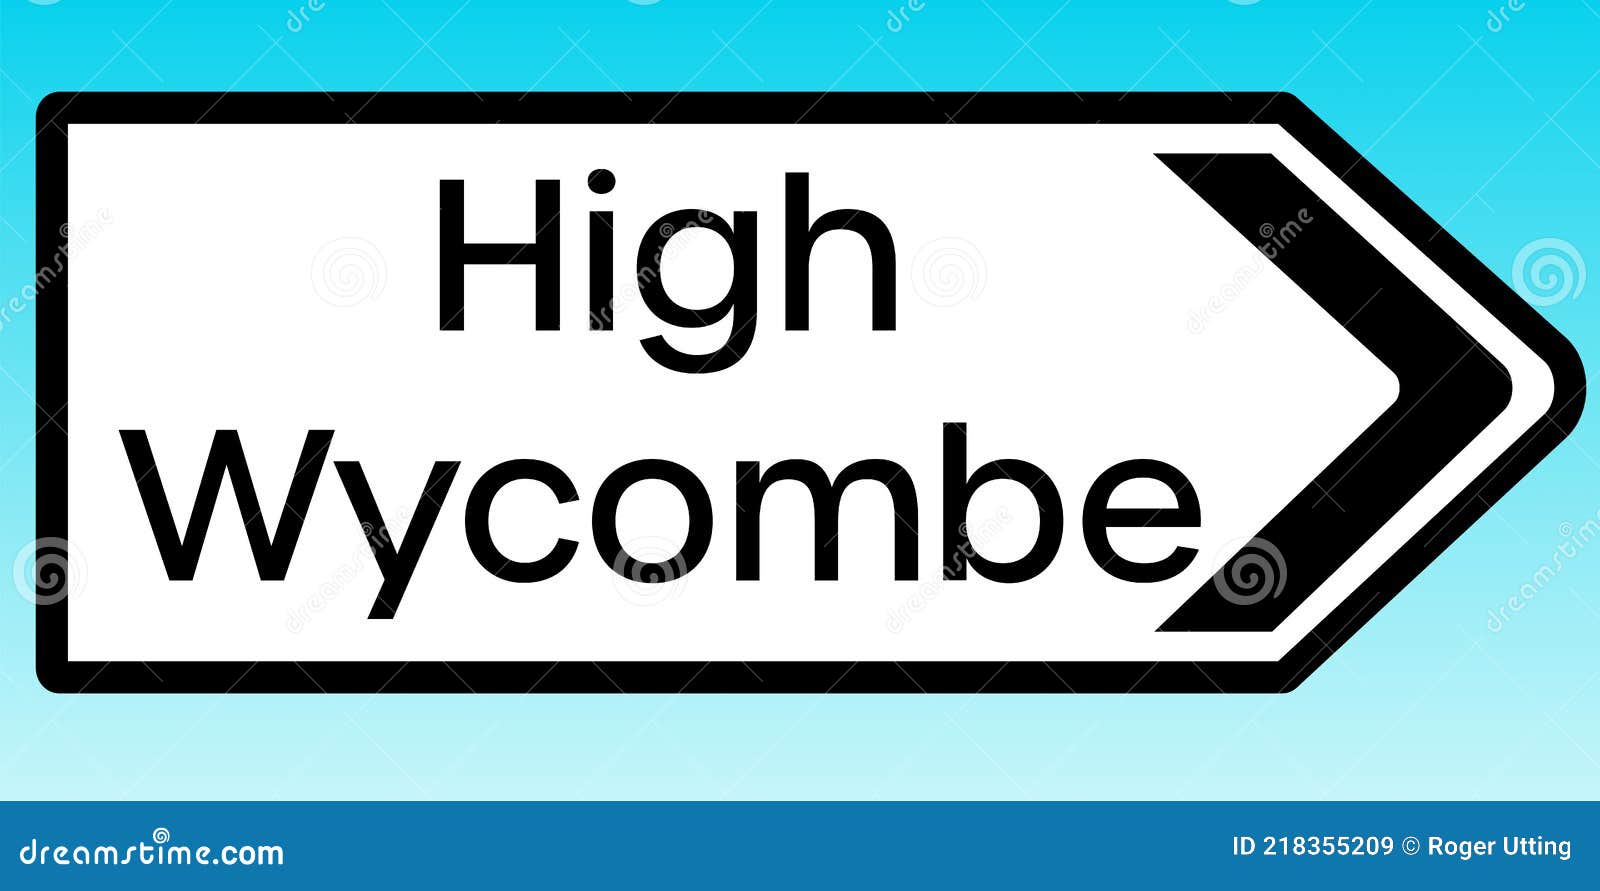 sign to high wycombe